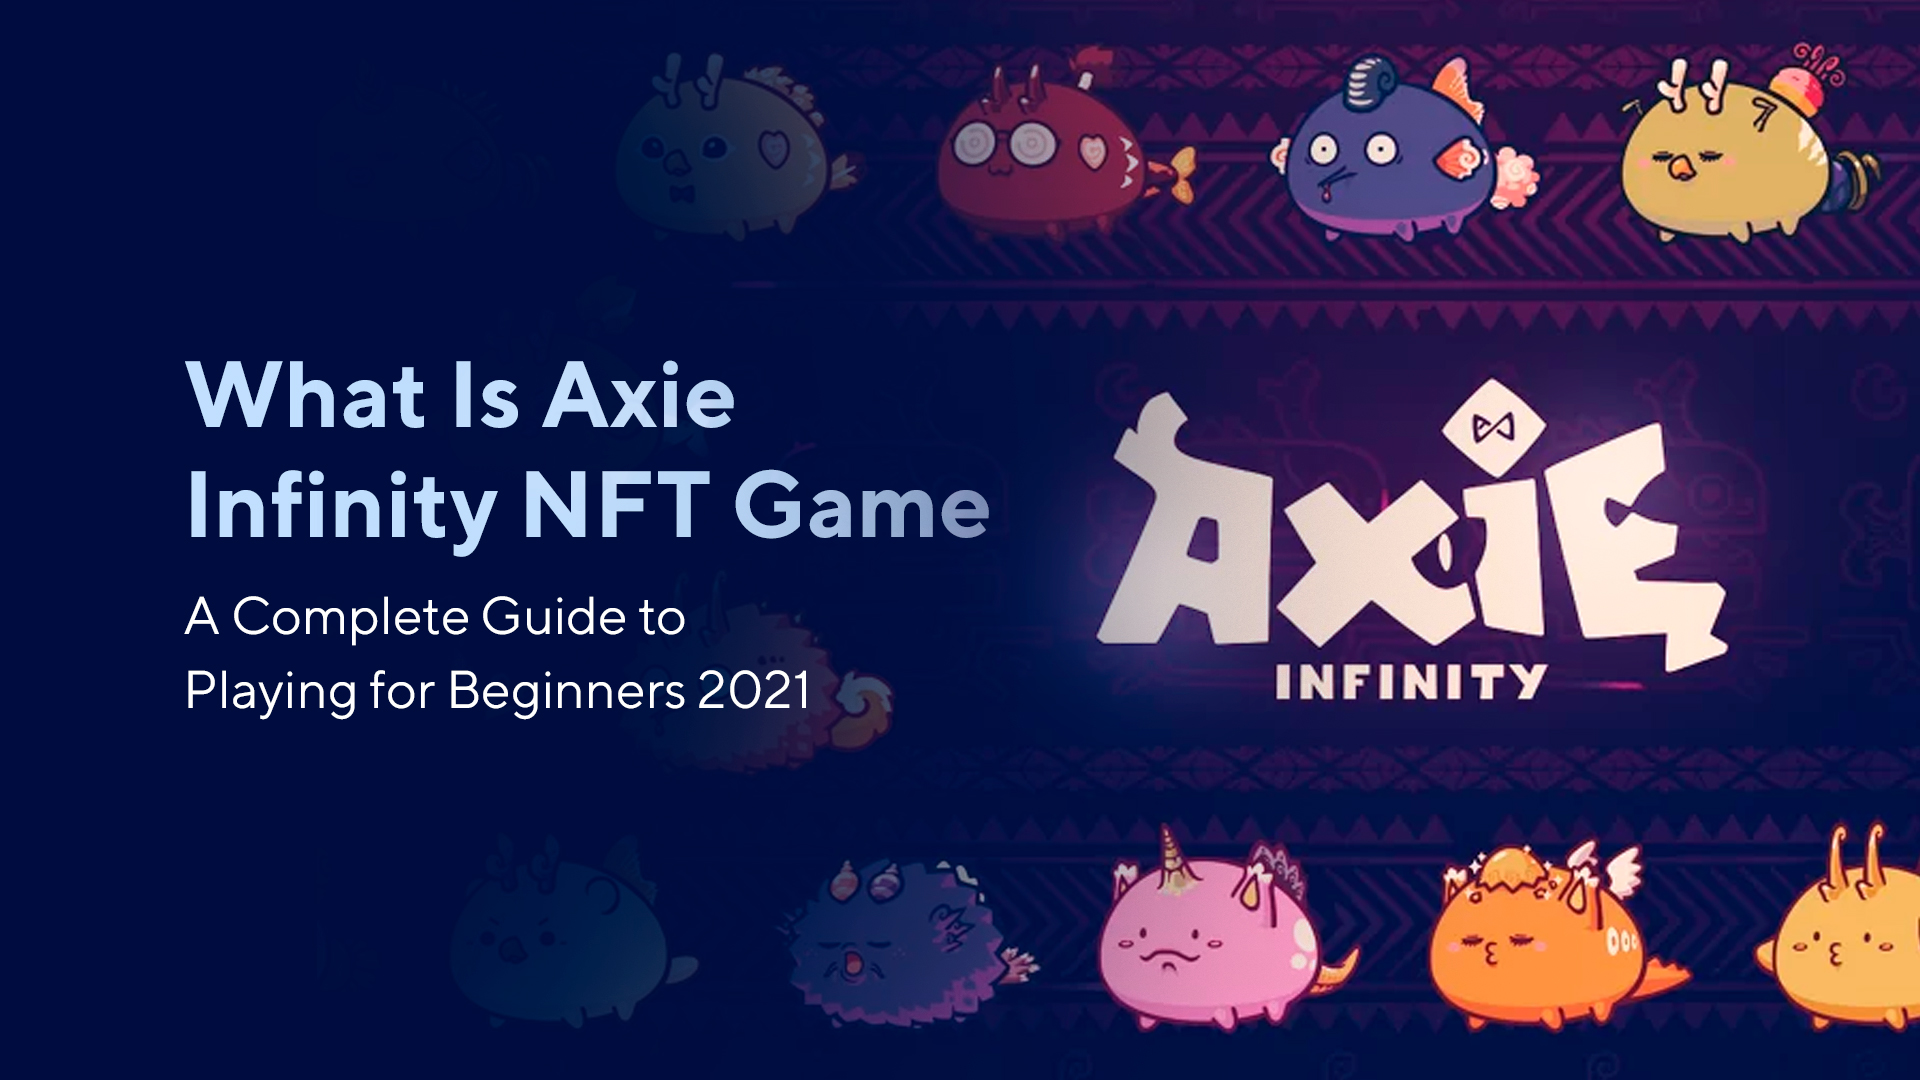 What Is Axie Infinity NFT Game: A Complete Guide to Playing for Beginners 2022